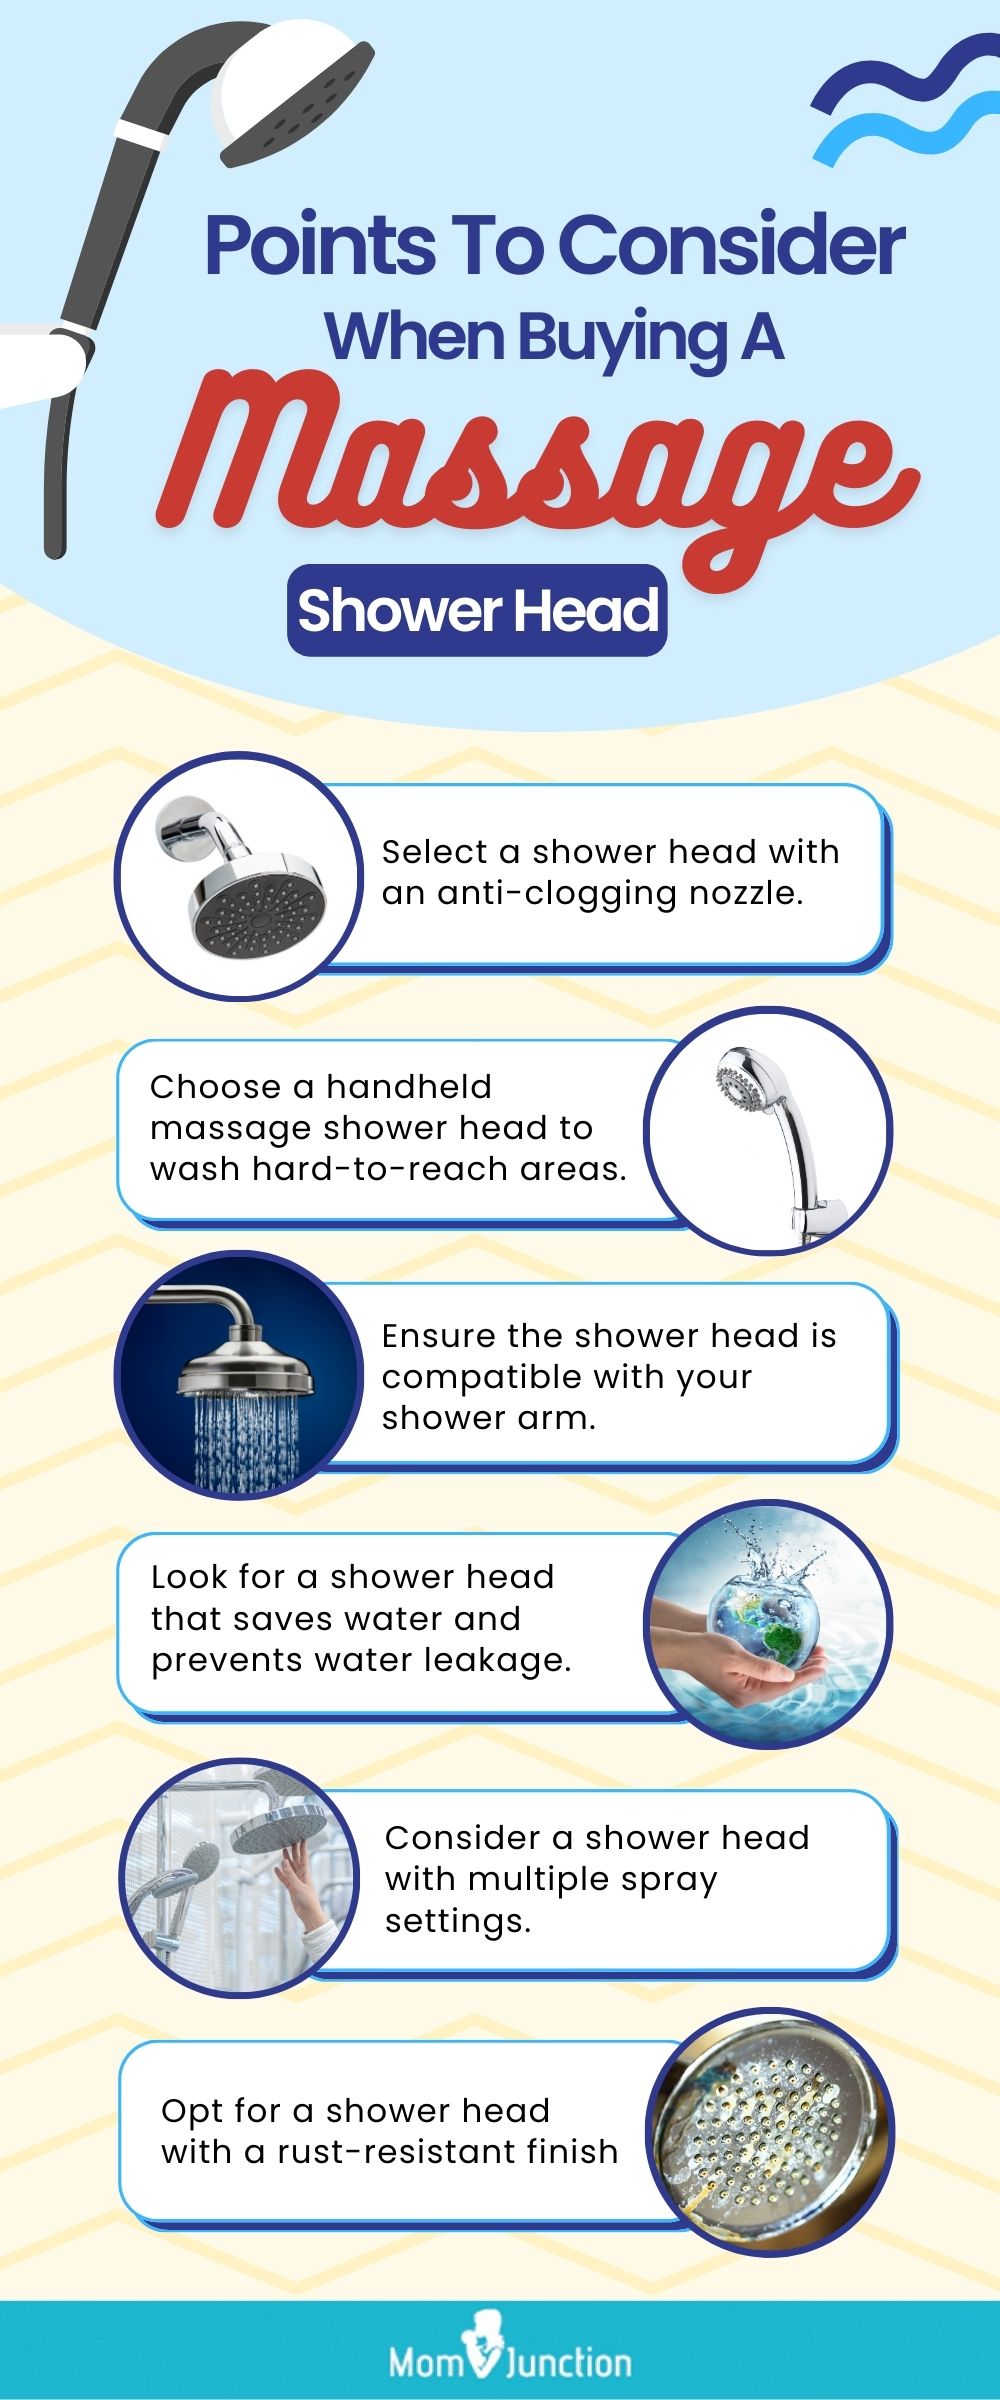 Points To Consider When Buying A Massage Shower Head (infographic)